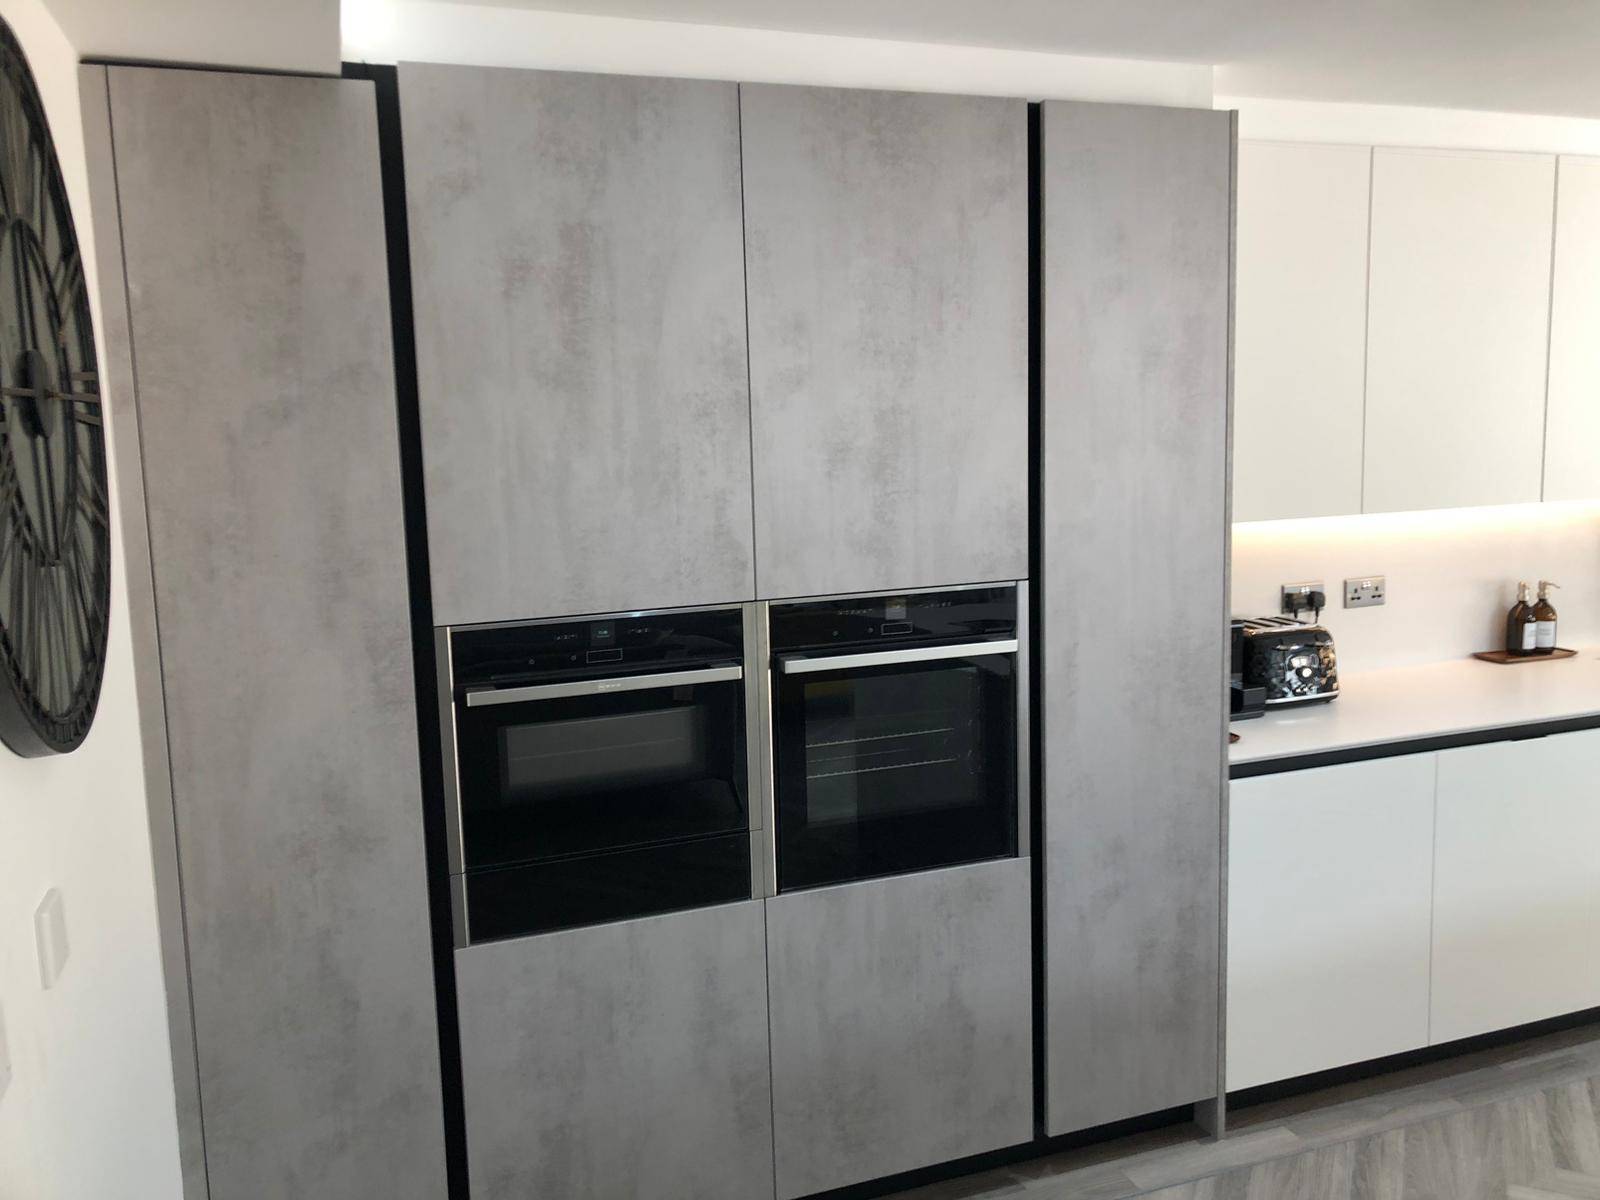 05 Hornchurch Rm11 | Net Kitchens, Walthamstow